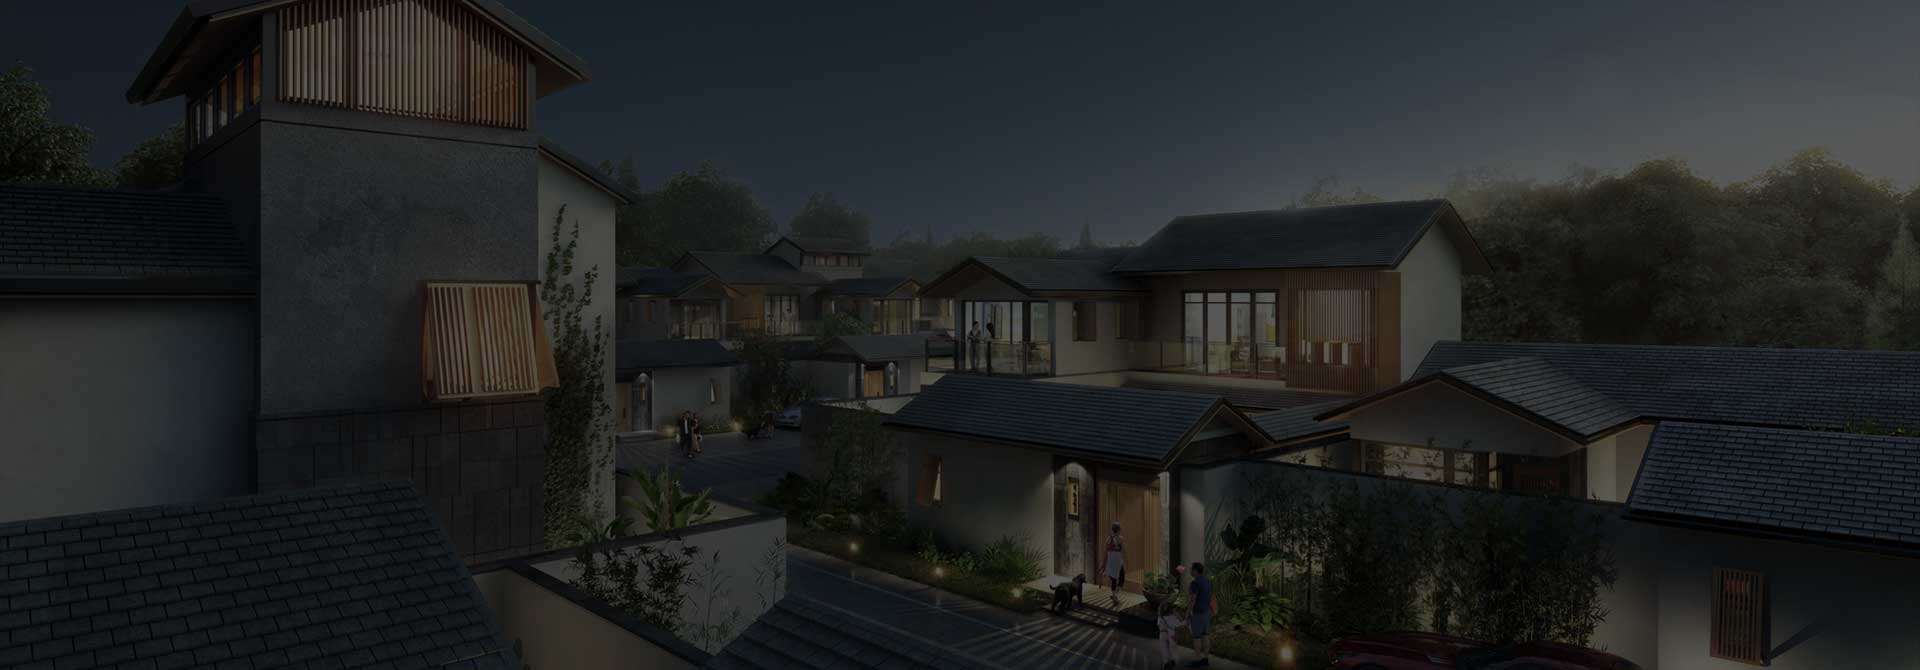 3D Architectural Animation Will Be the Best Choice for the Real Estate Industry